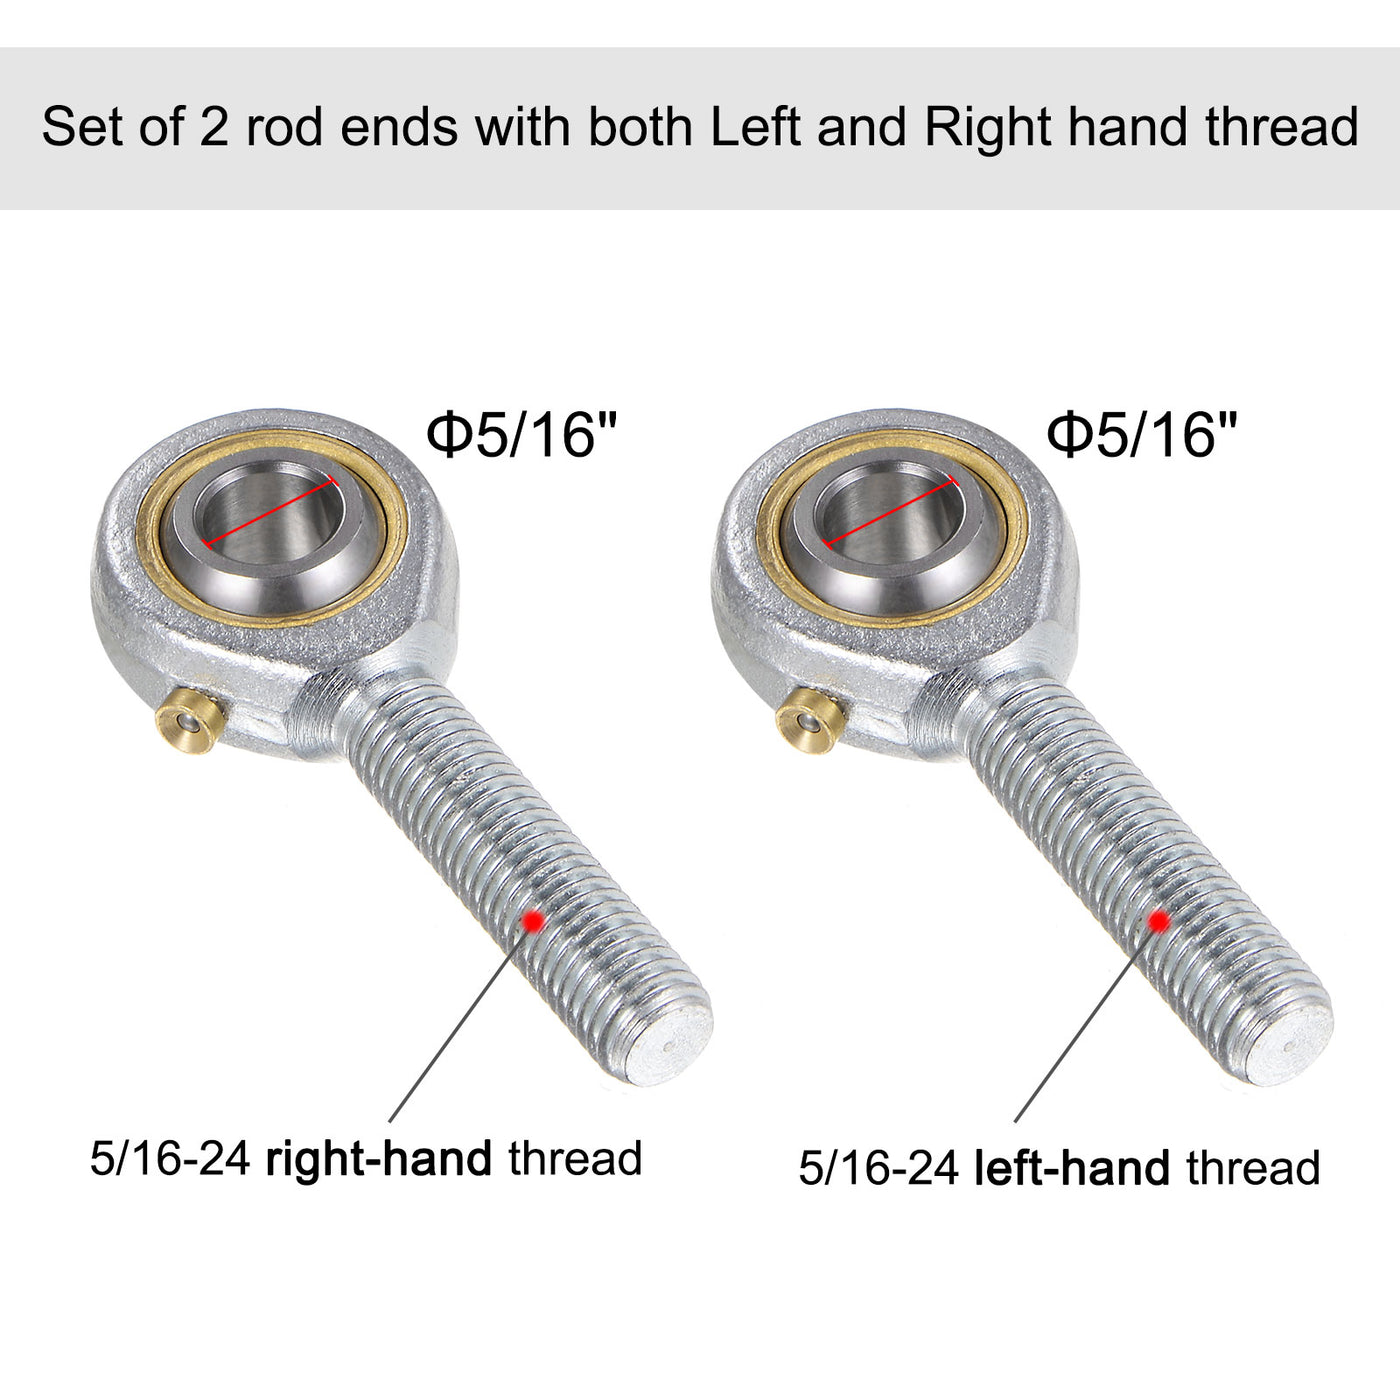 uxcell Uxcell POSB5 5/16" Male Rod End Set - 2pcs of 5/16-24 Left & Right Thread with Jam Nut